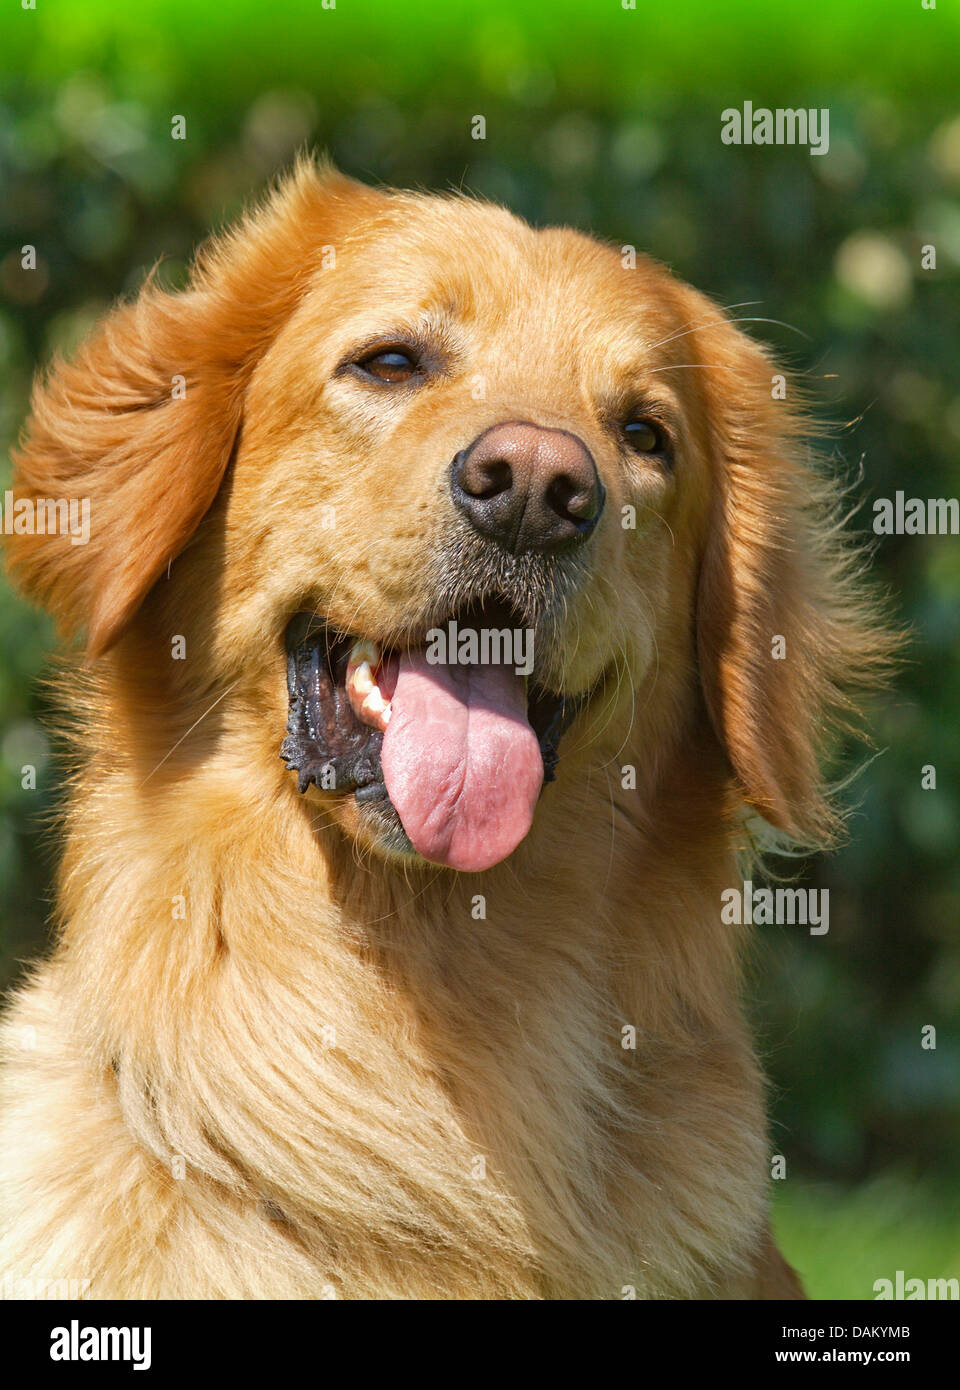 Hovawart (Canis lupus f. familiaris), portrait of a blond male dog, Germany Stock Photo